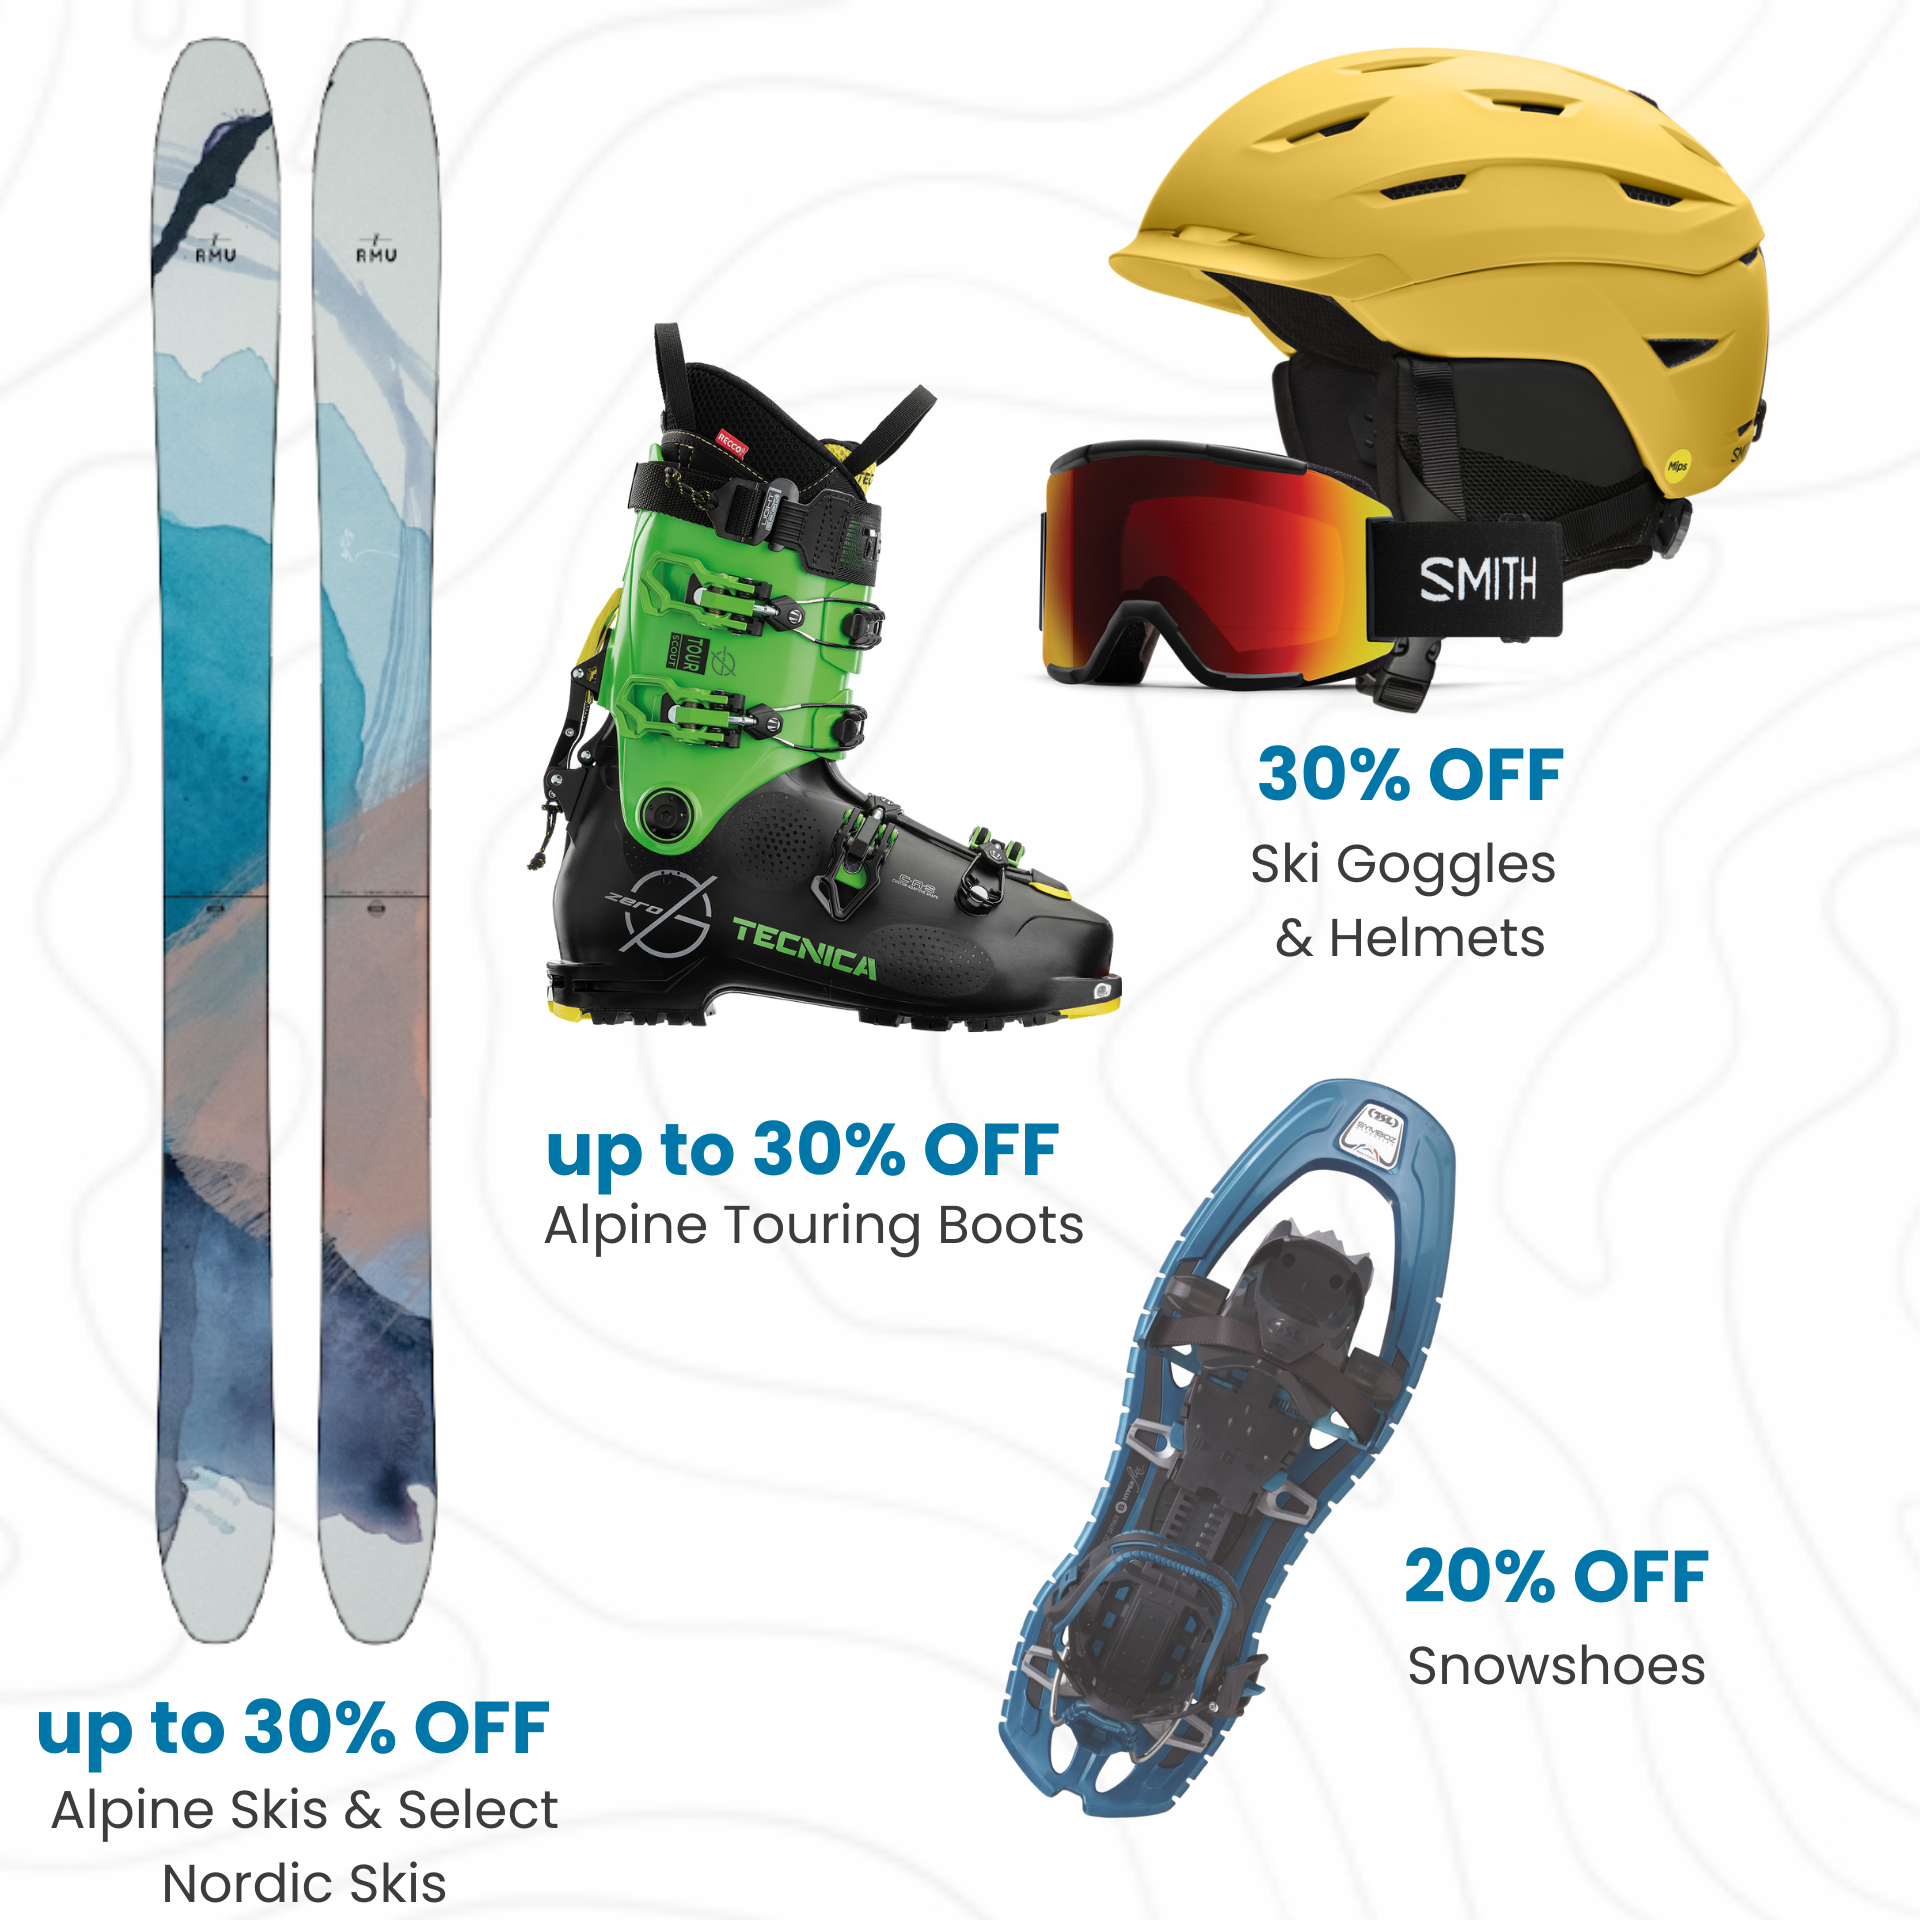 Up to 30% off Alpine Skis, Select Nordic Skis, AT Boots, Goggles & Helmets; 20% off snowshoes